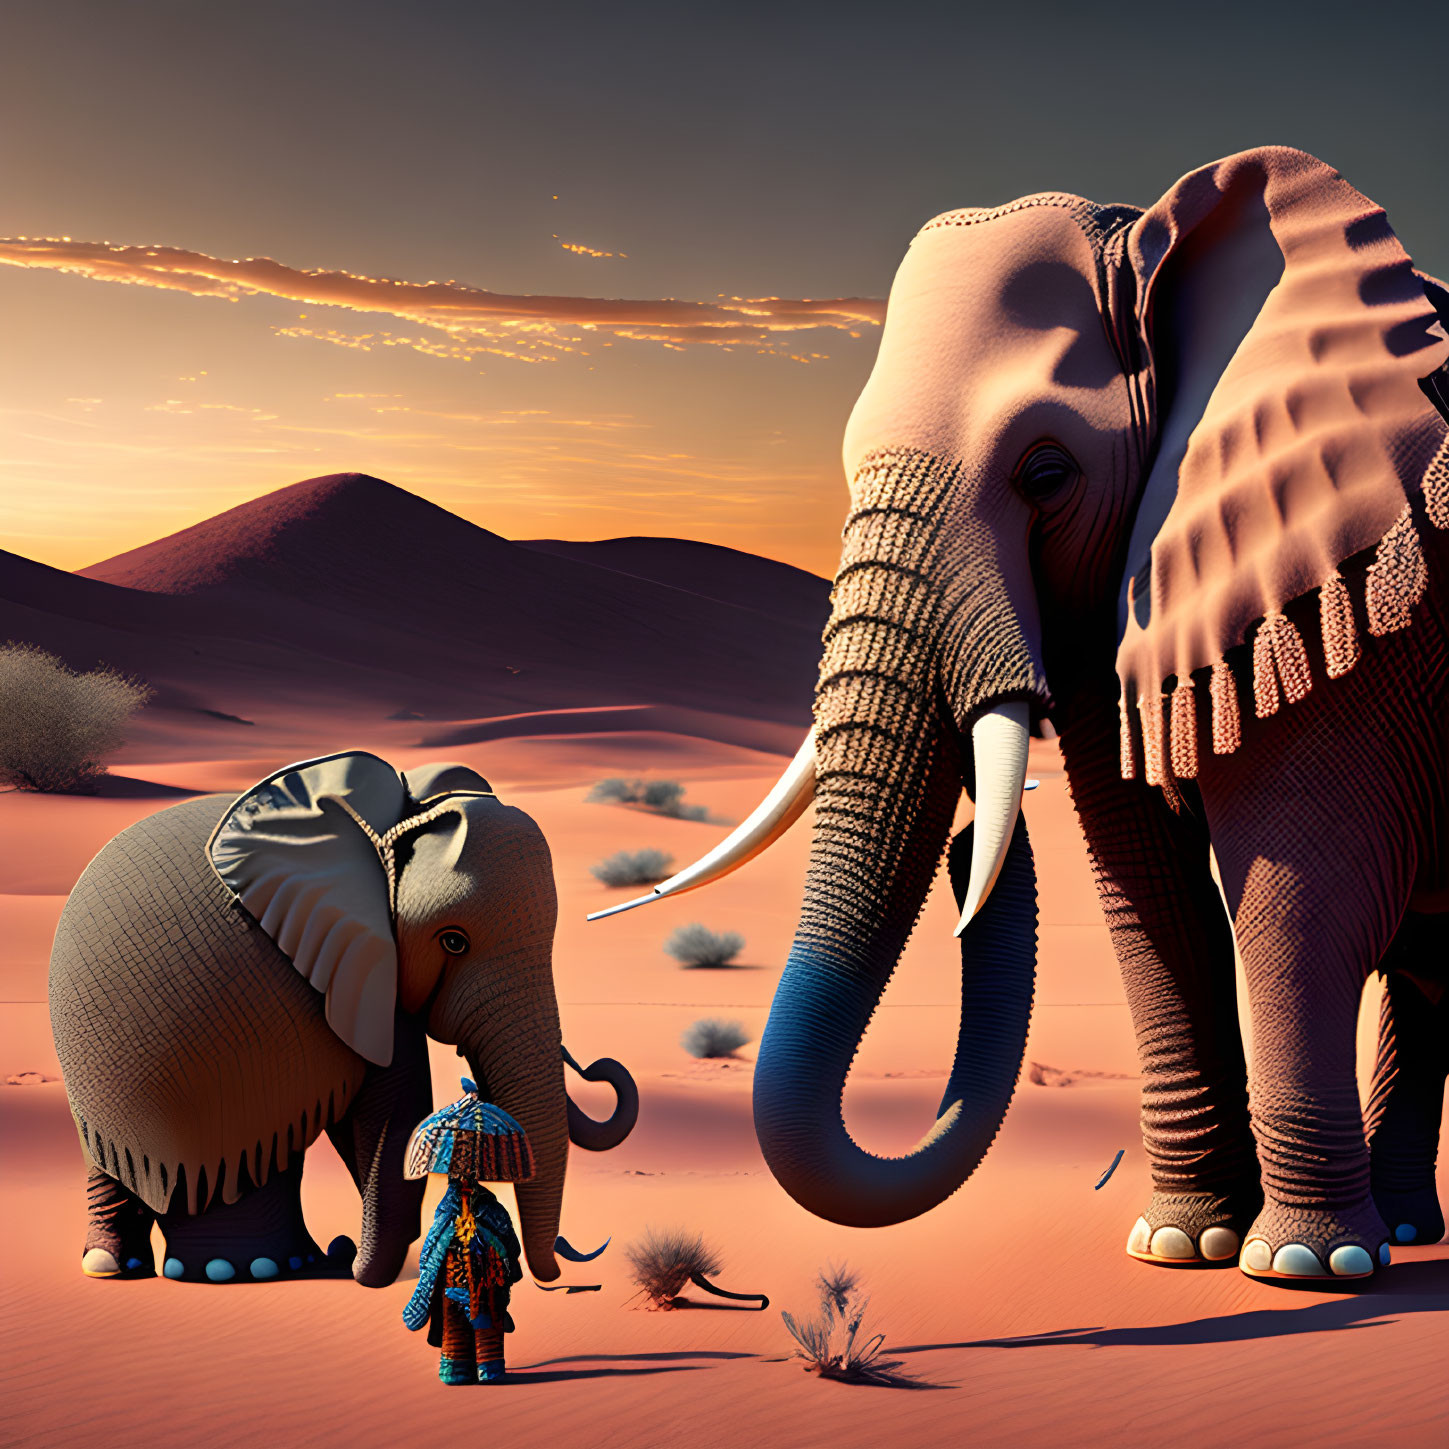 Digital artwork featuring two elephants and tribal figure in surreal desert landscape